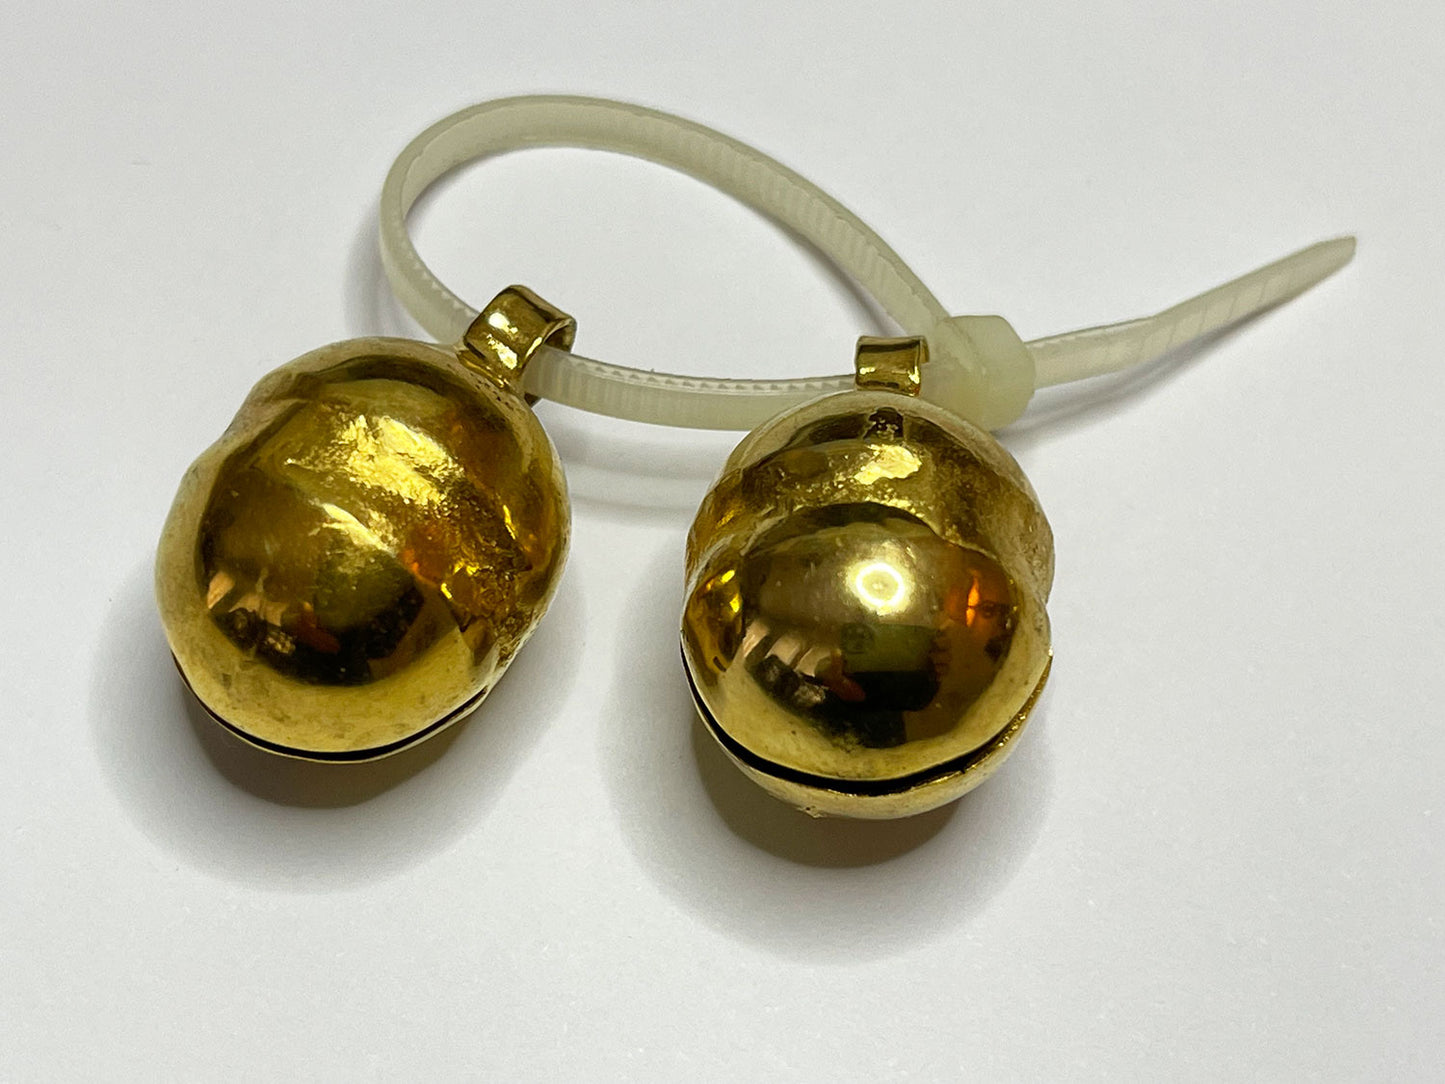 Lahore Falconry Bell: Gold Plated Brass